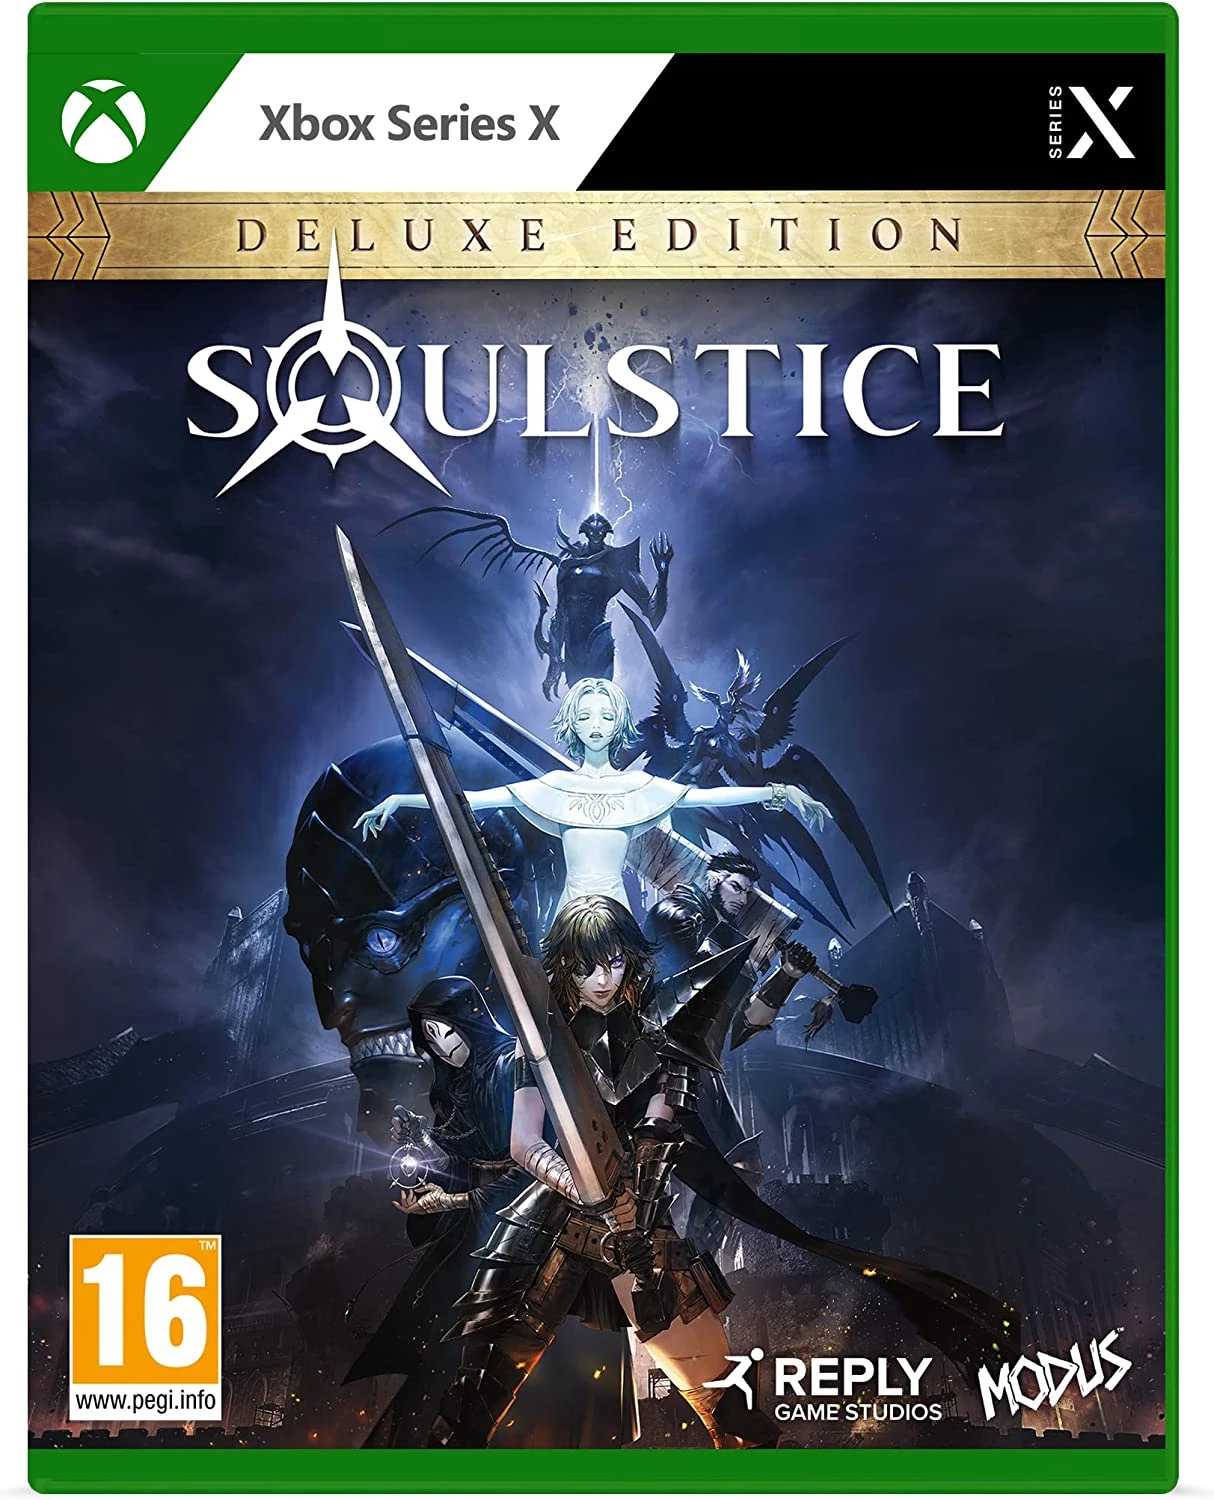 Soulstice - Deluxe Edition (Xbox Series X), Reply Game Studios, Modus